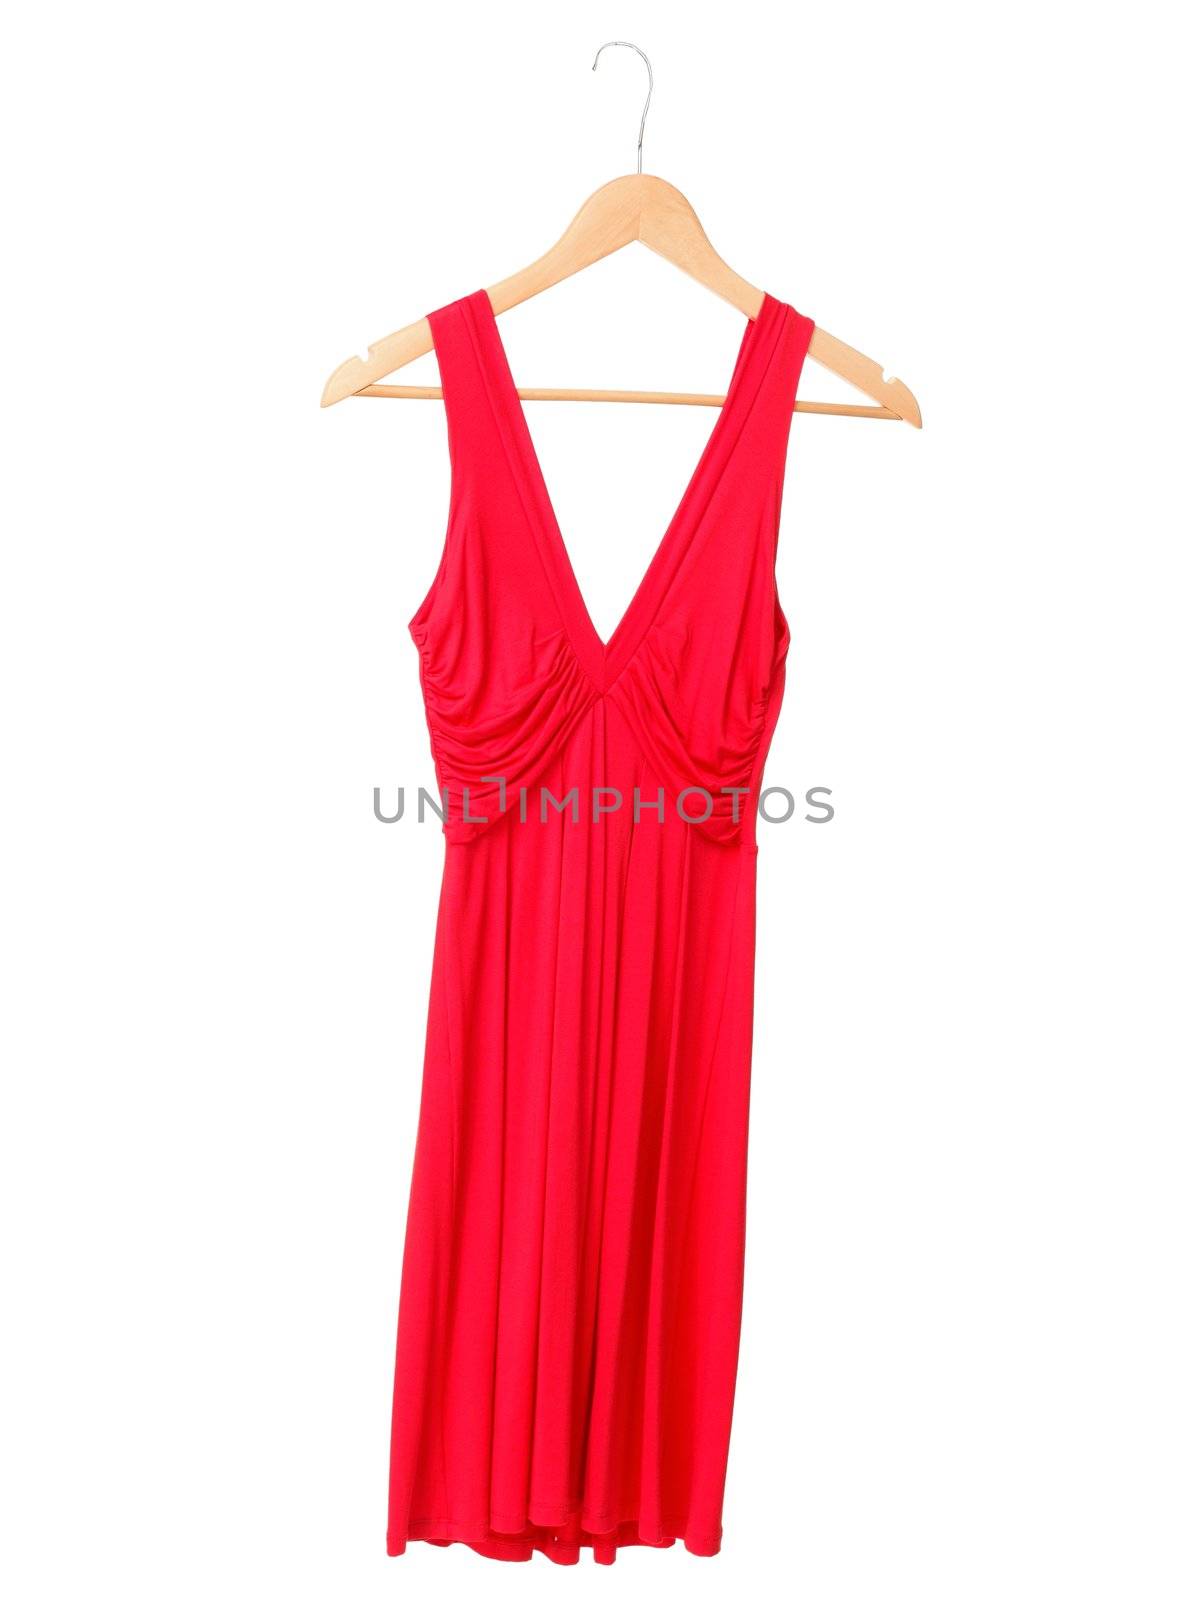 Red summer dress on hanger isolated on white background.